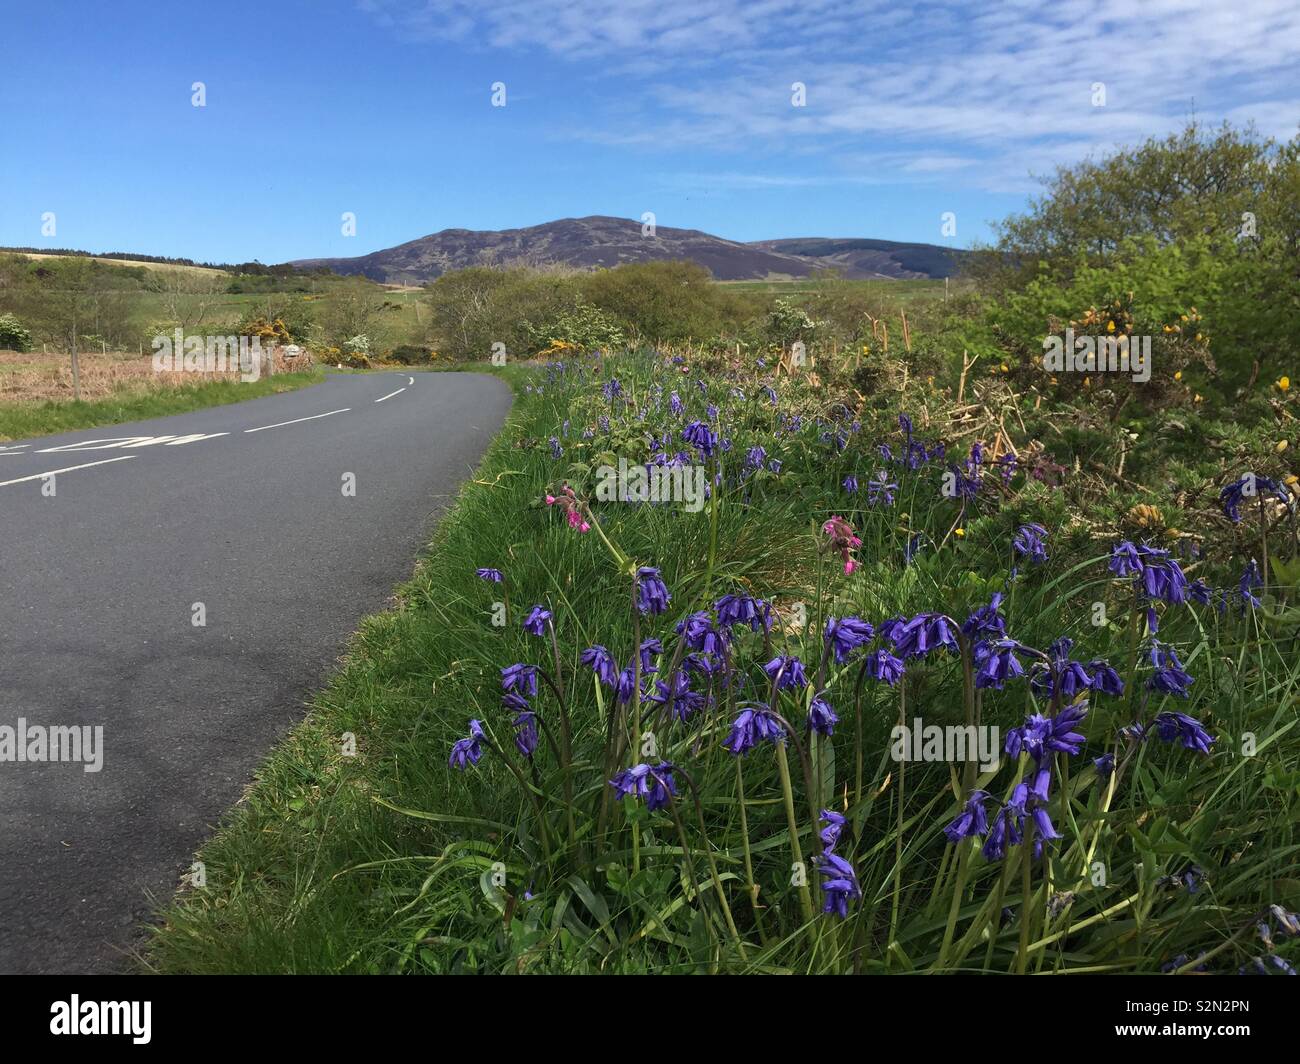 Roadside verge with springtime wildflowers, bluebells and flowers in bloom Stock Photo